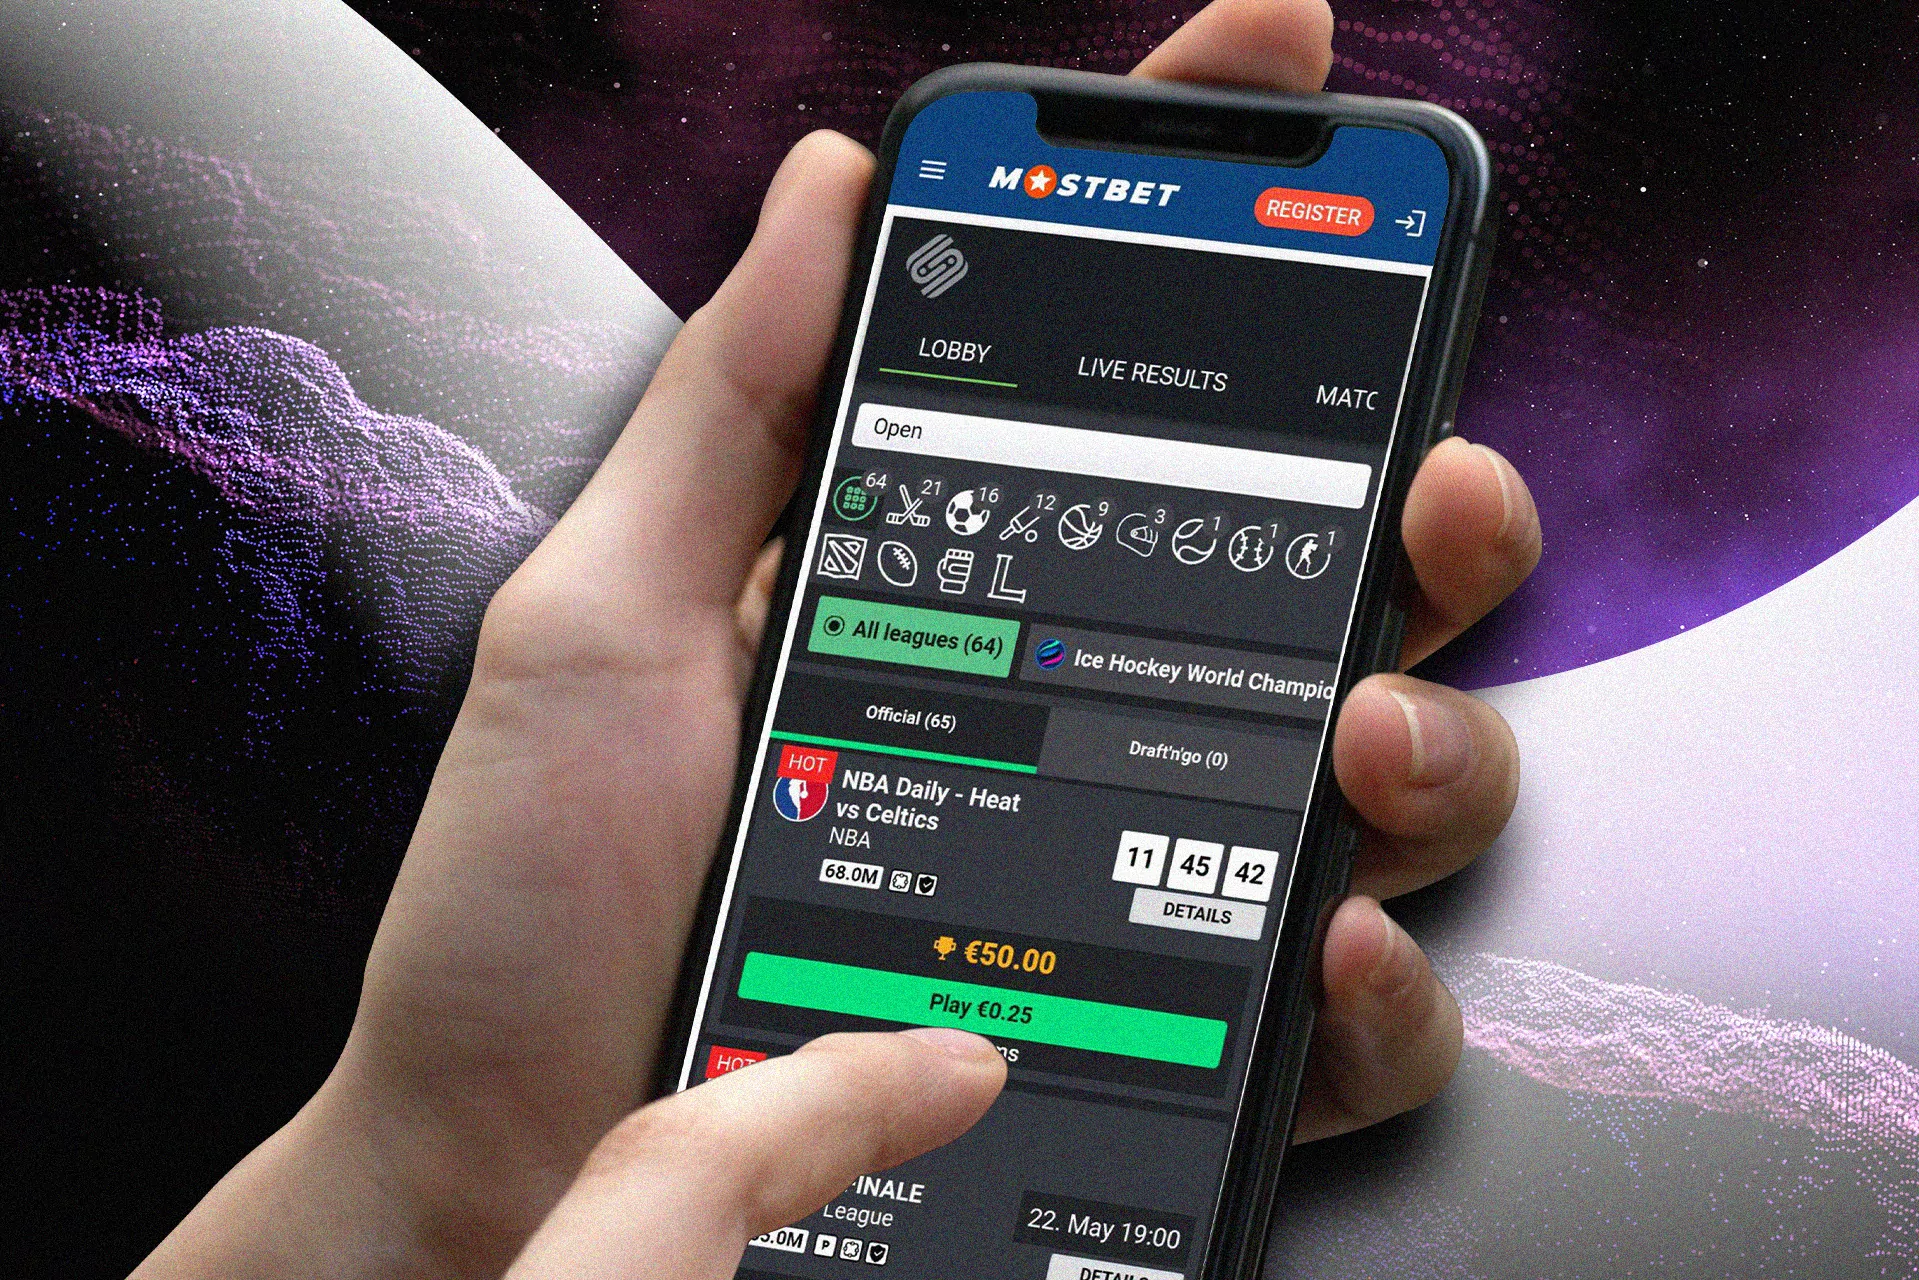 Fantasy leagues are also available ot bet via the Mostbet app.